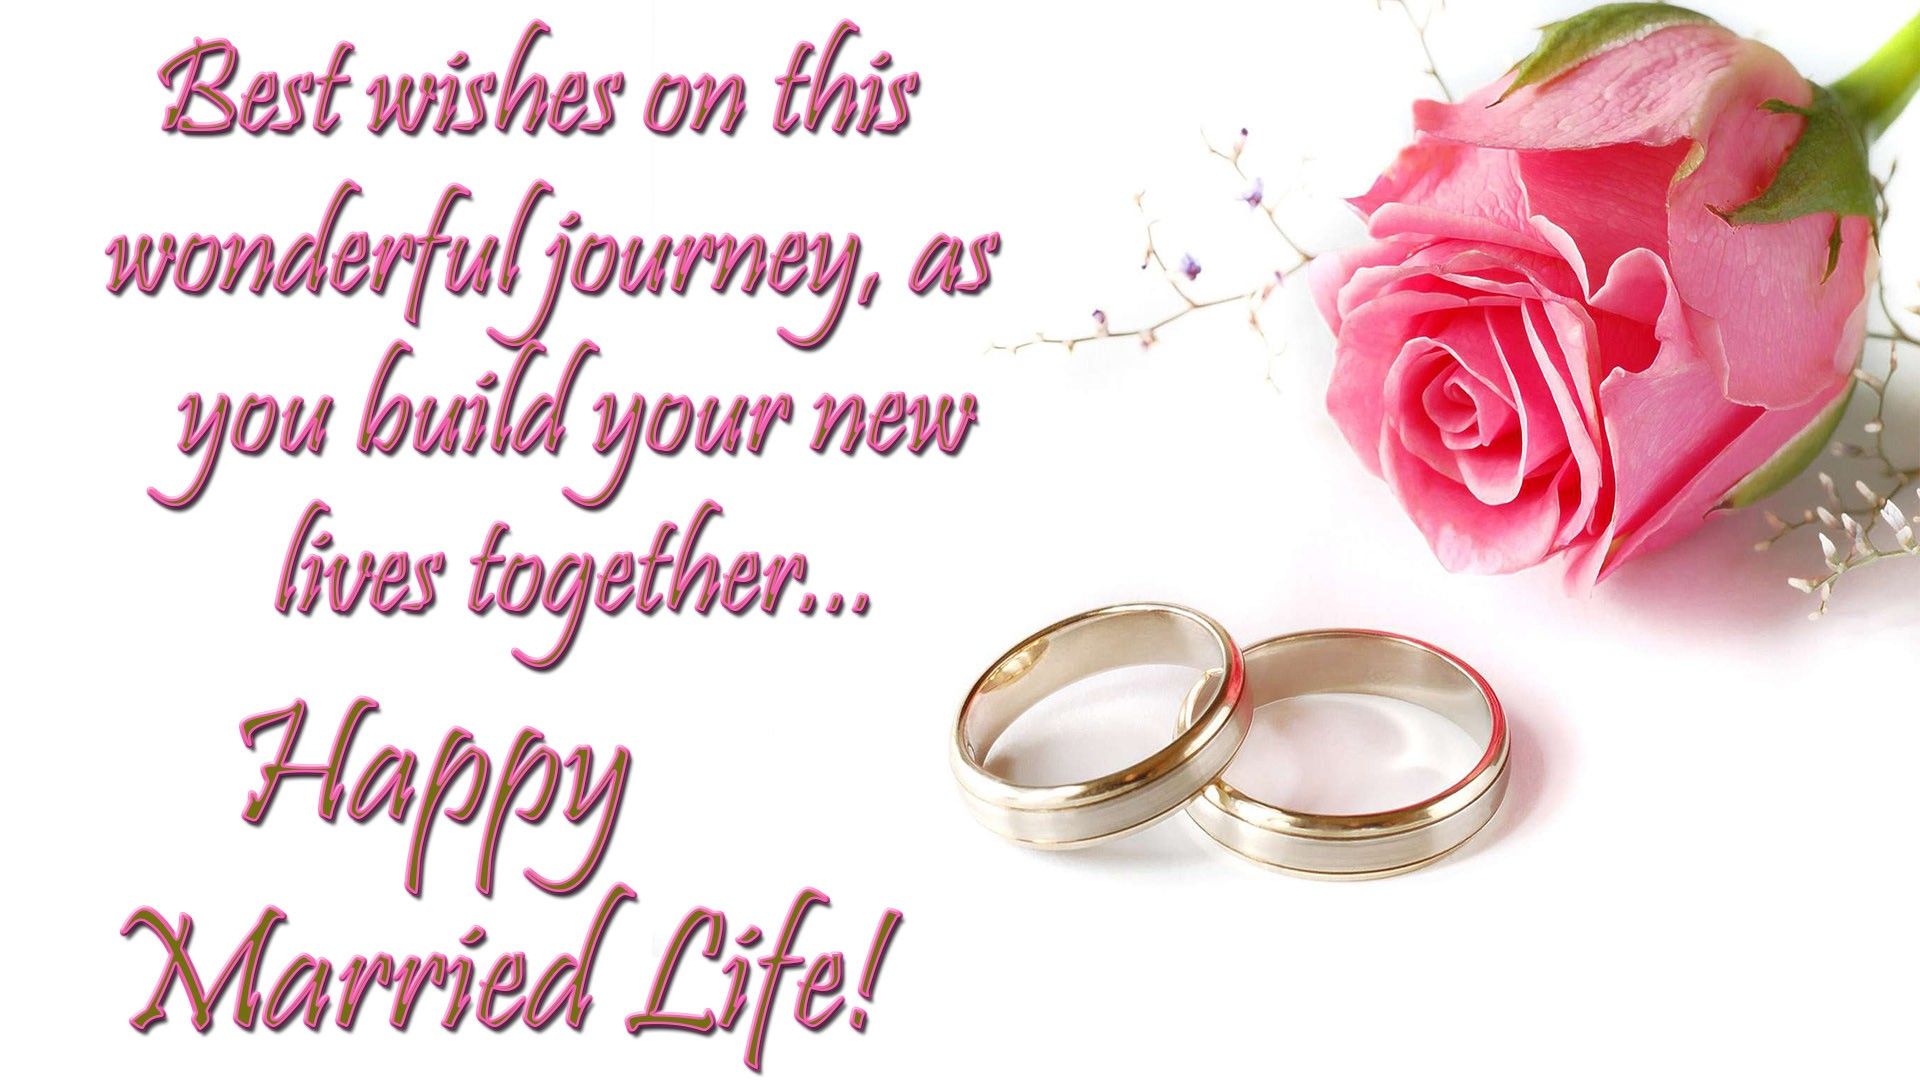 good wishes. Happy married life, Happy marriage life wishes, Marriage wishes image